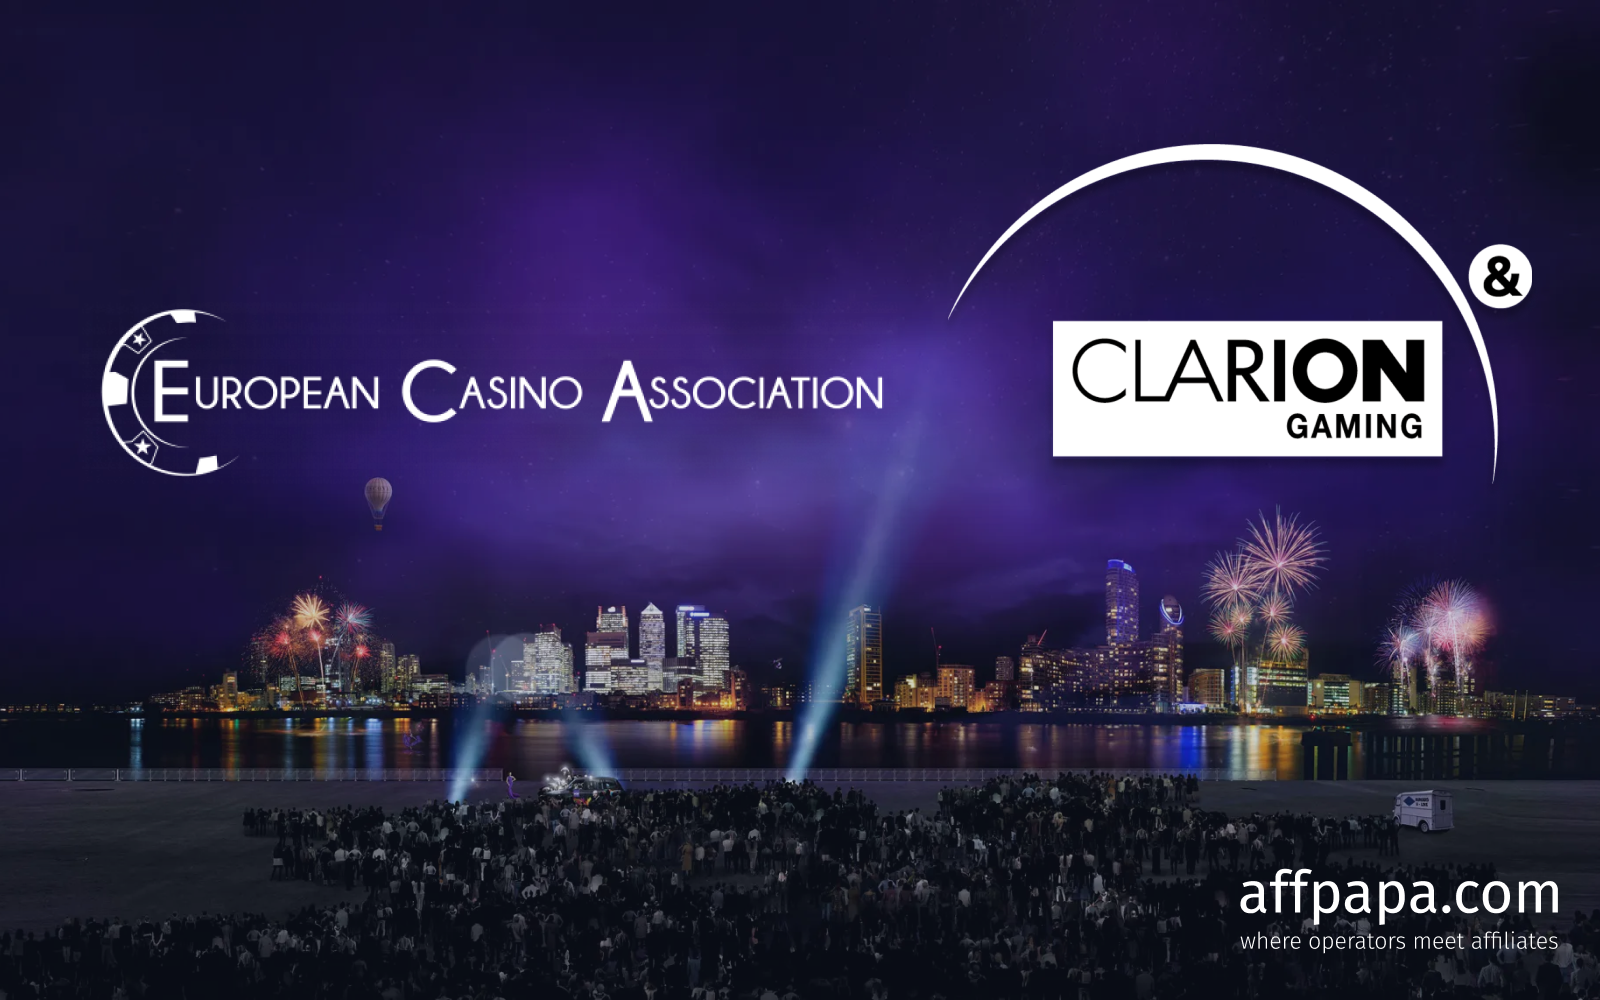 ECA and Clarion Gaming prepare for the ICE 2023